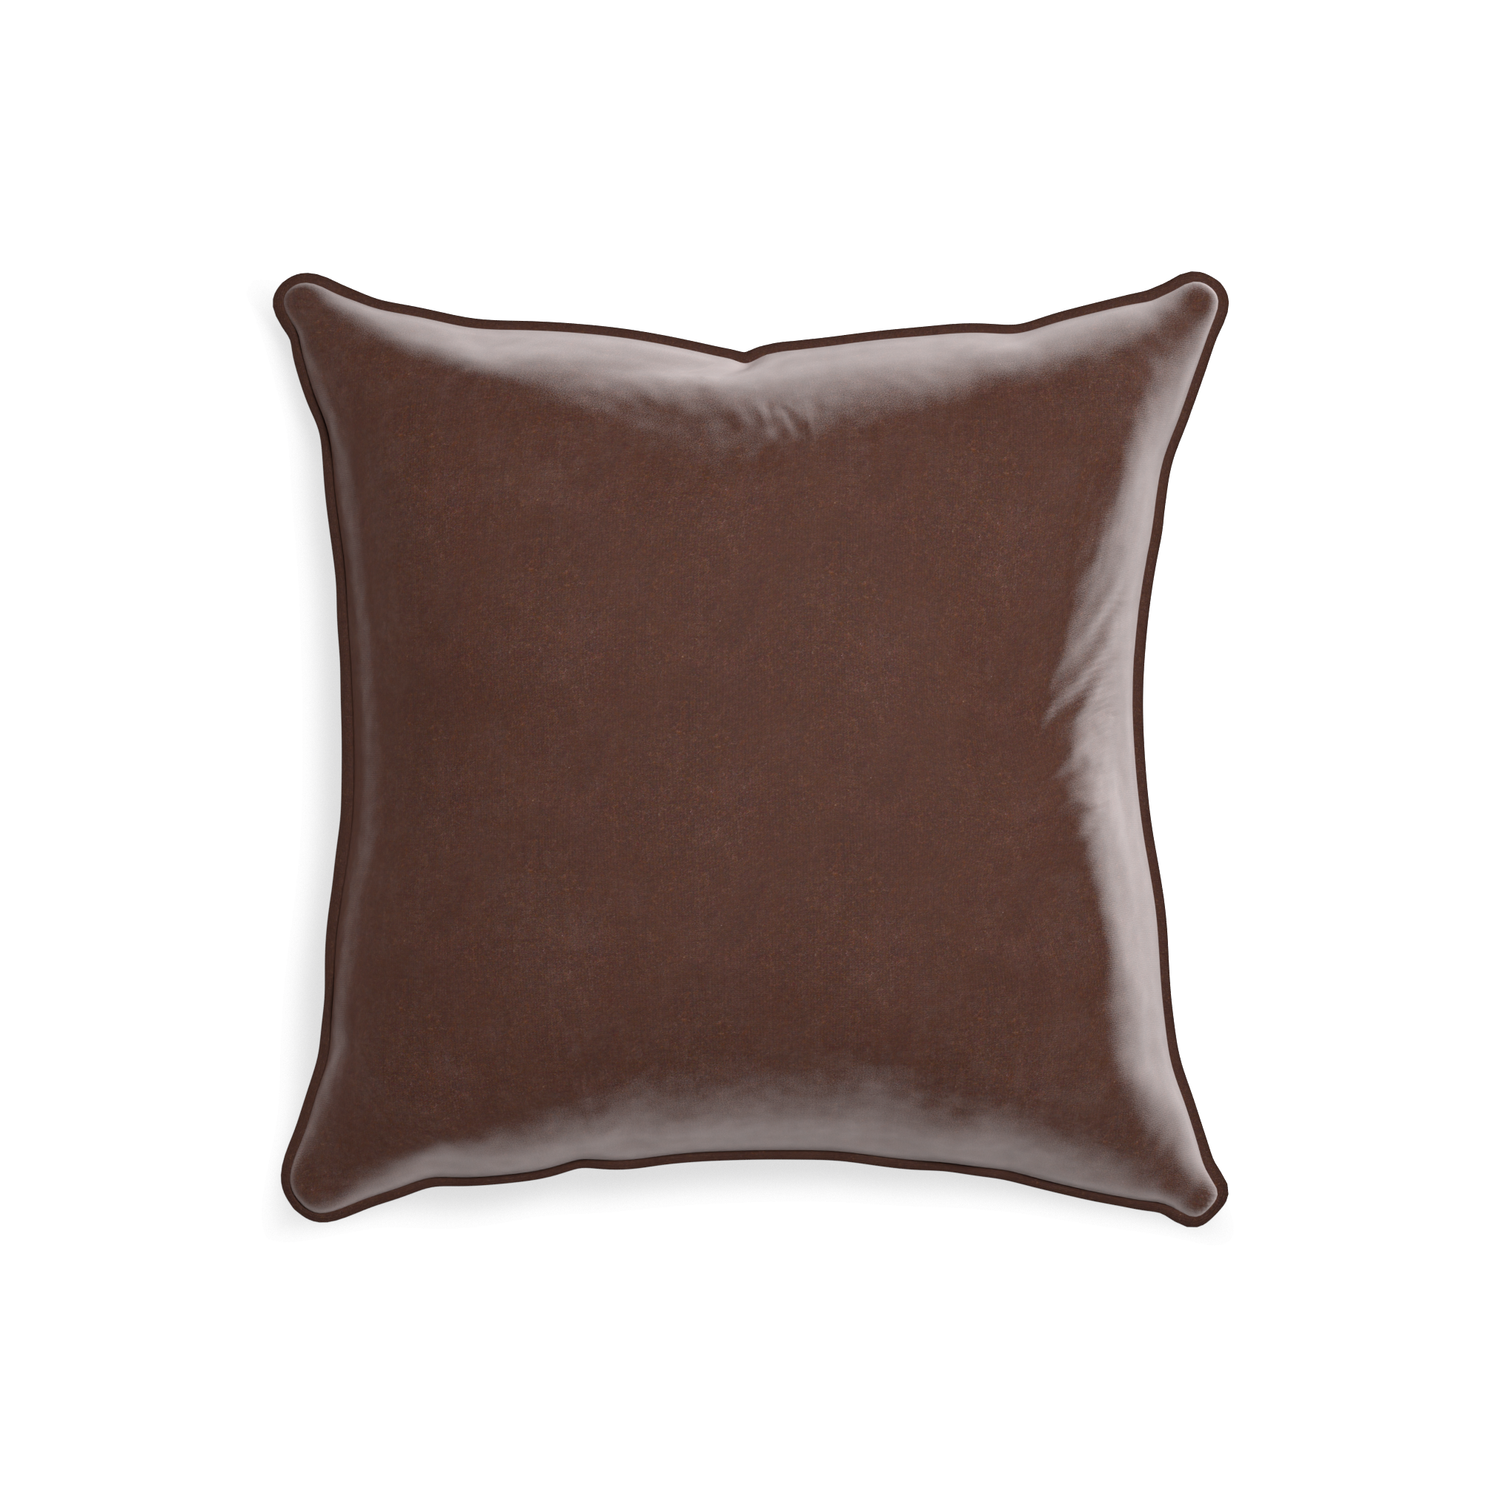 square brown velvet pillow with brown piping